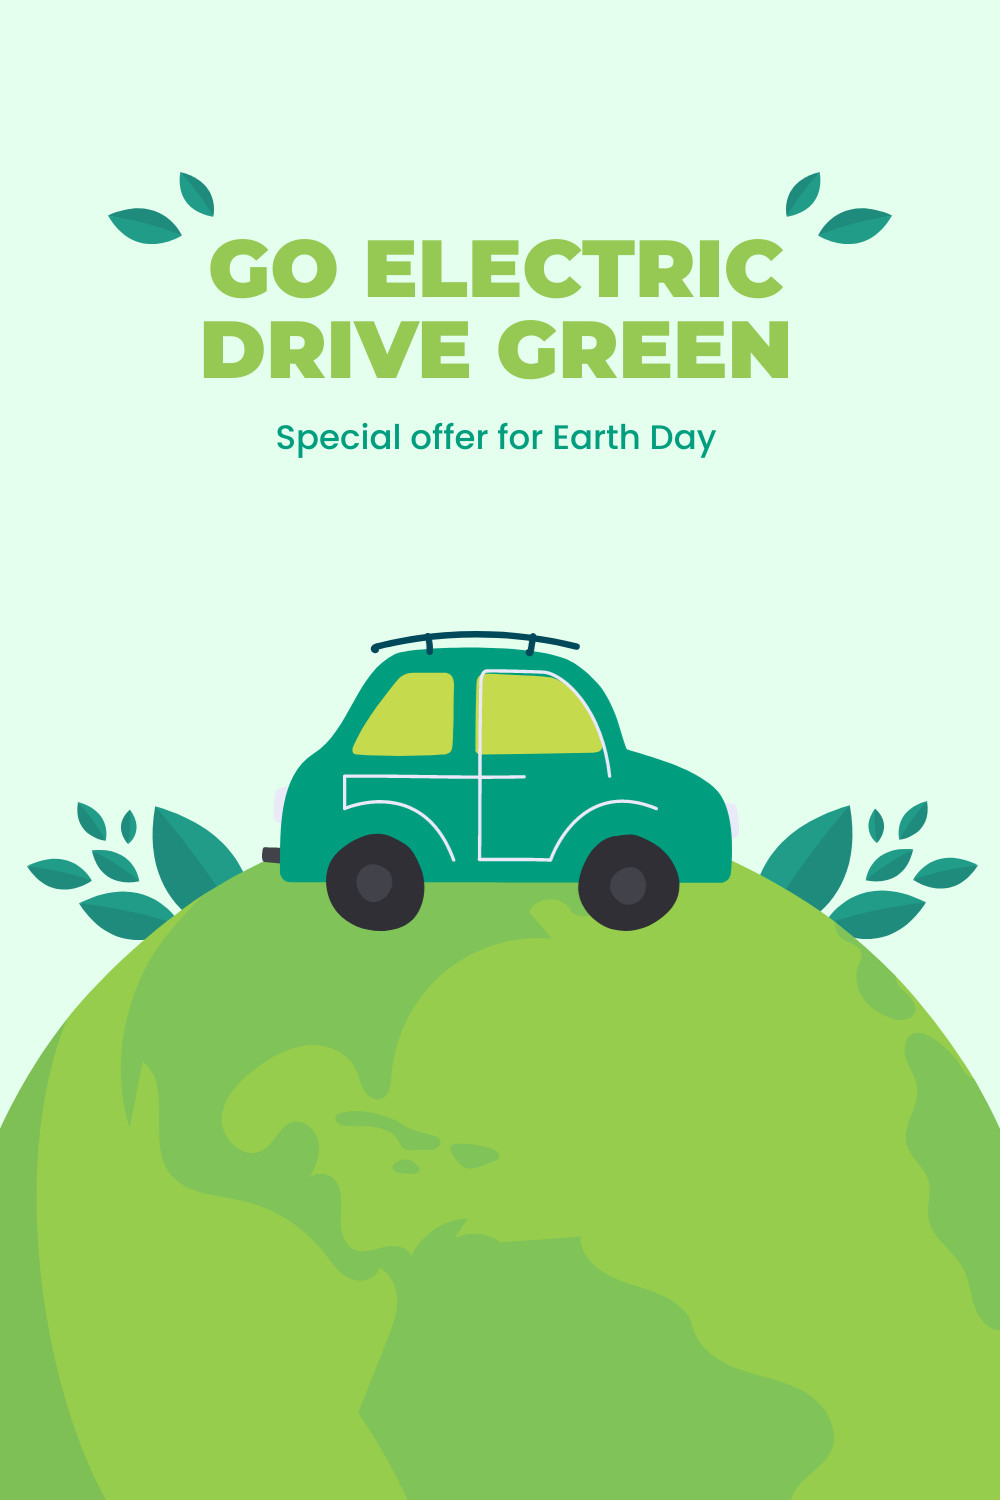 Earth Day Go Electric Drive Green Facebook Cover 820x360